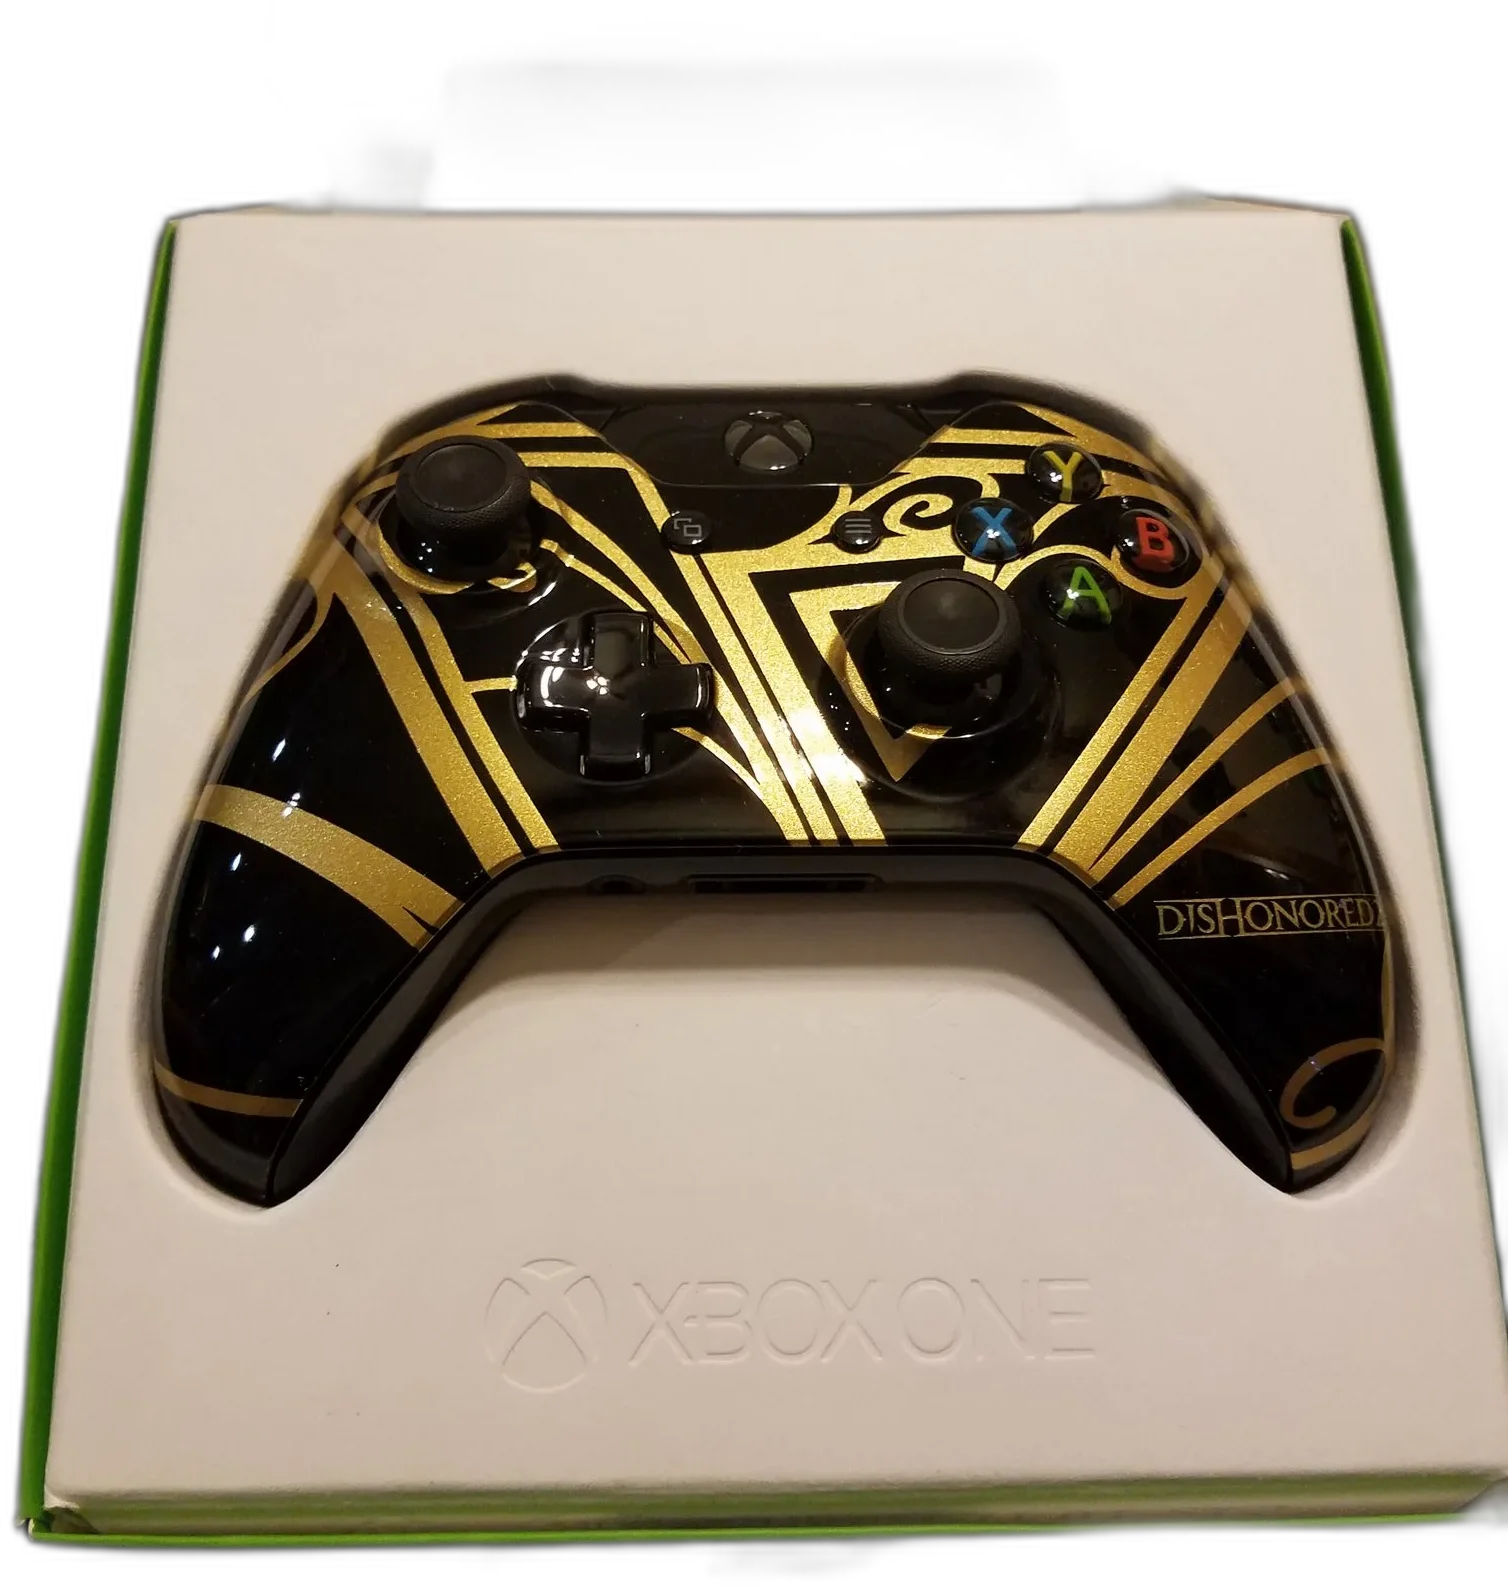  Microsoft Xbox One S Dishonored 2 Controller